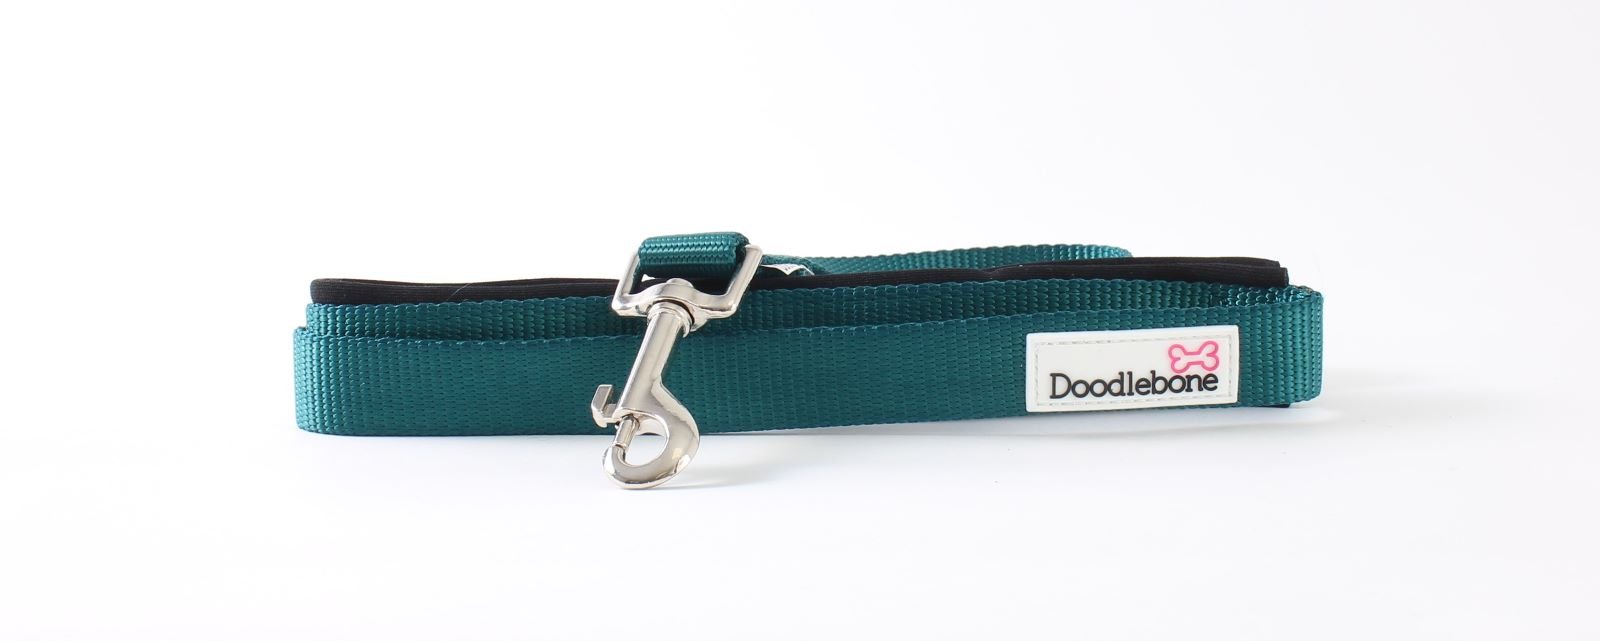 Camoflage Print Doodlebone Collars and padded  Leads